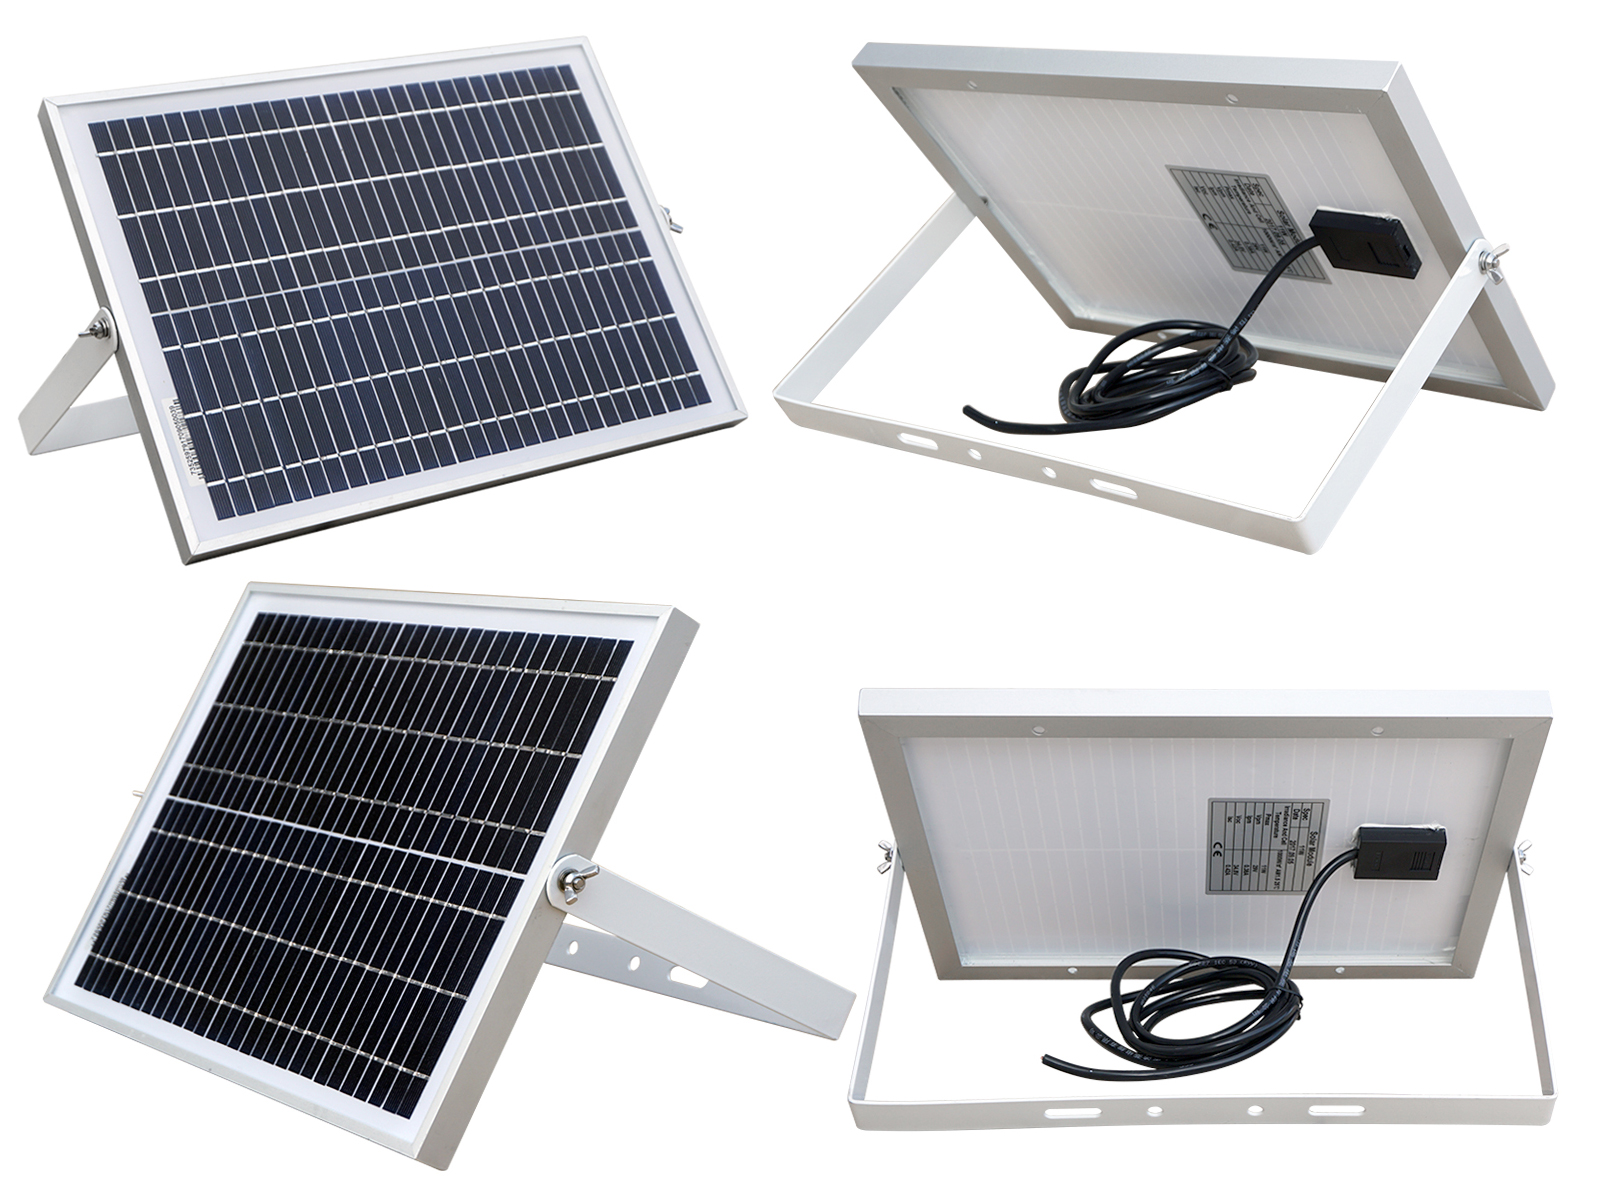 solar panel for automatic gate opener